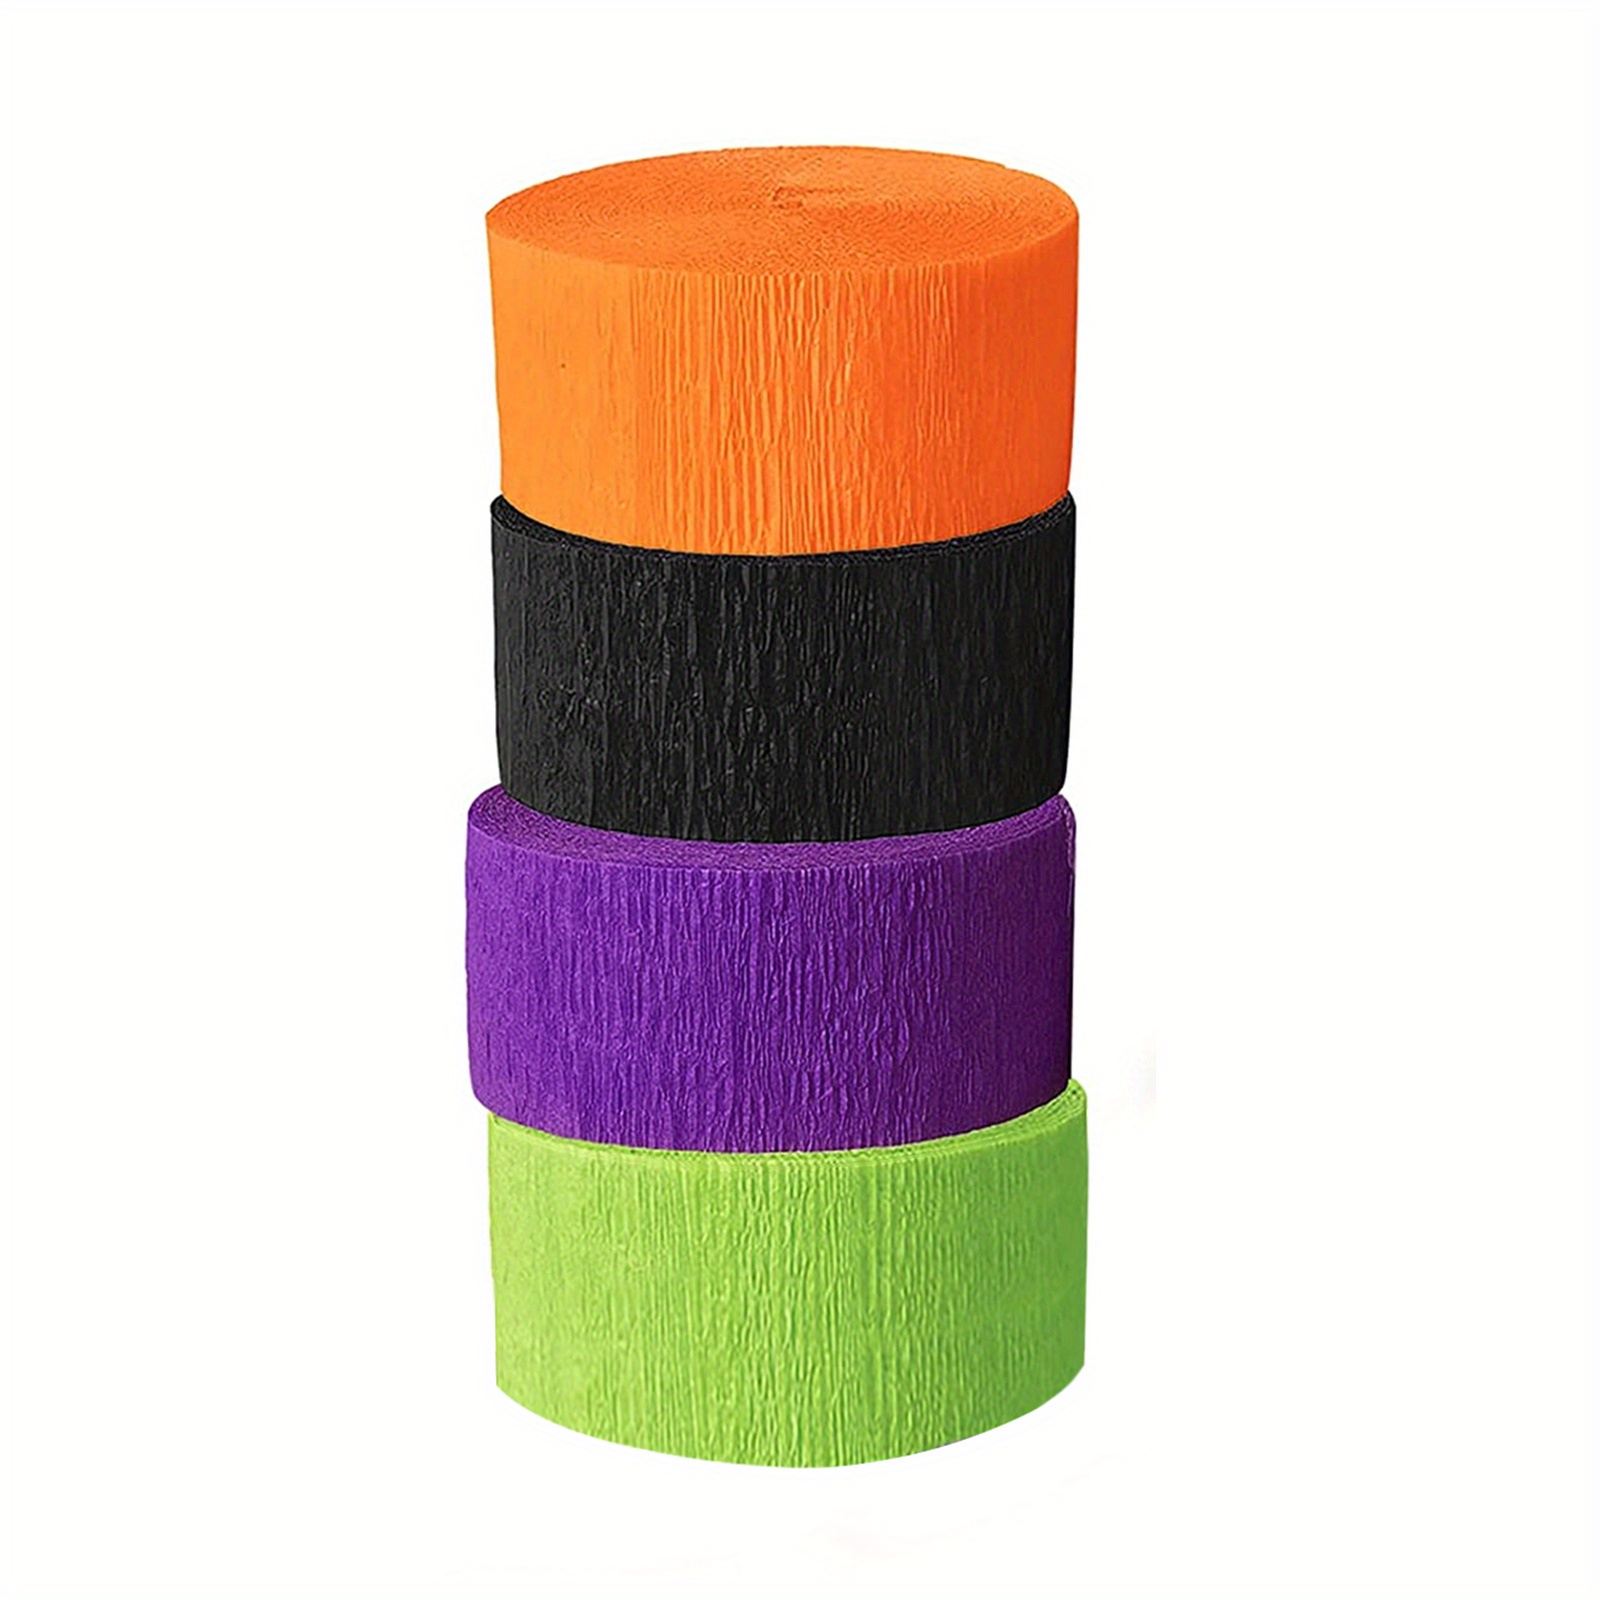 Pack of 4 & 8) Top Quality Crepe Paper Roll For Activities & Party